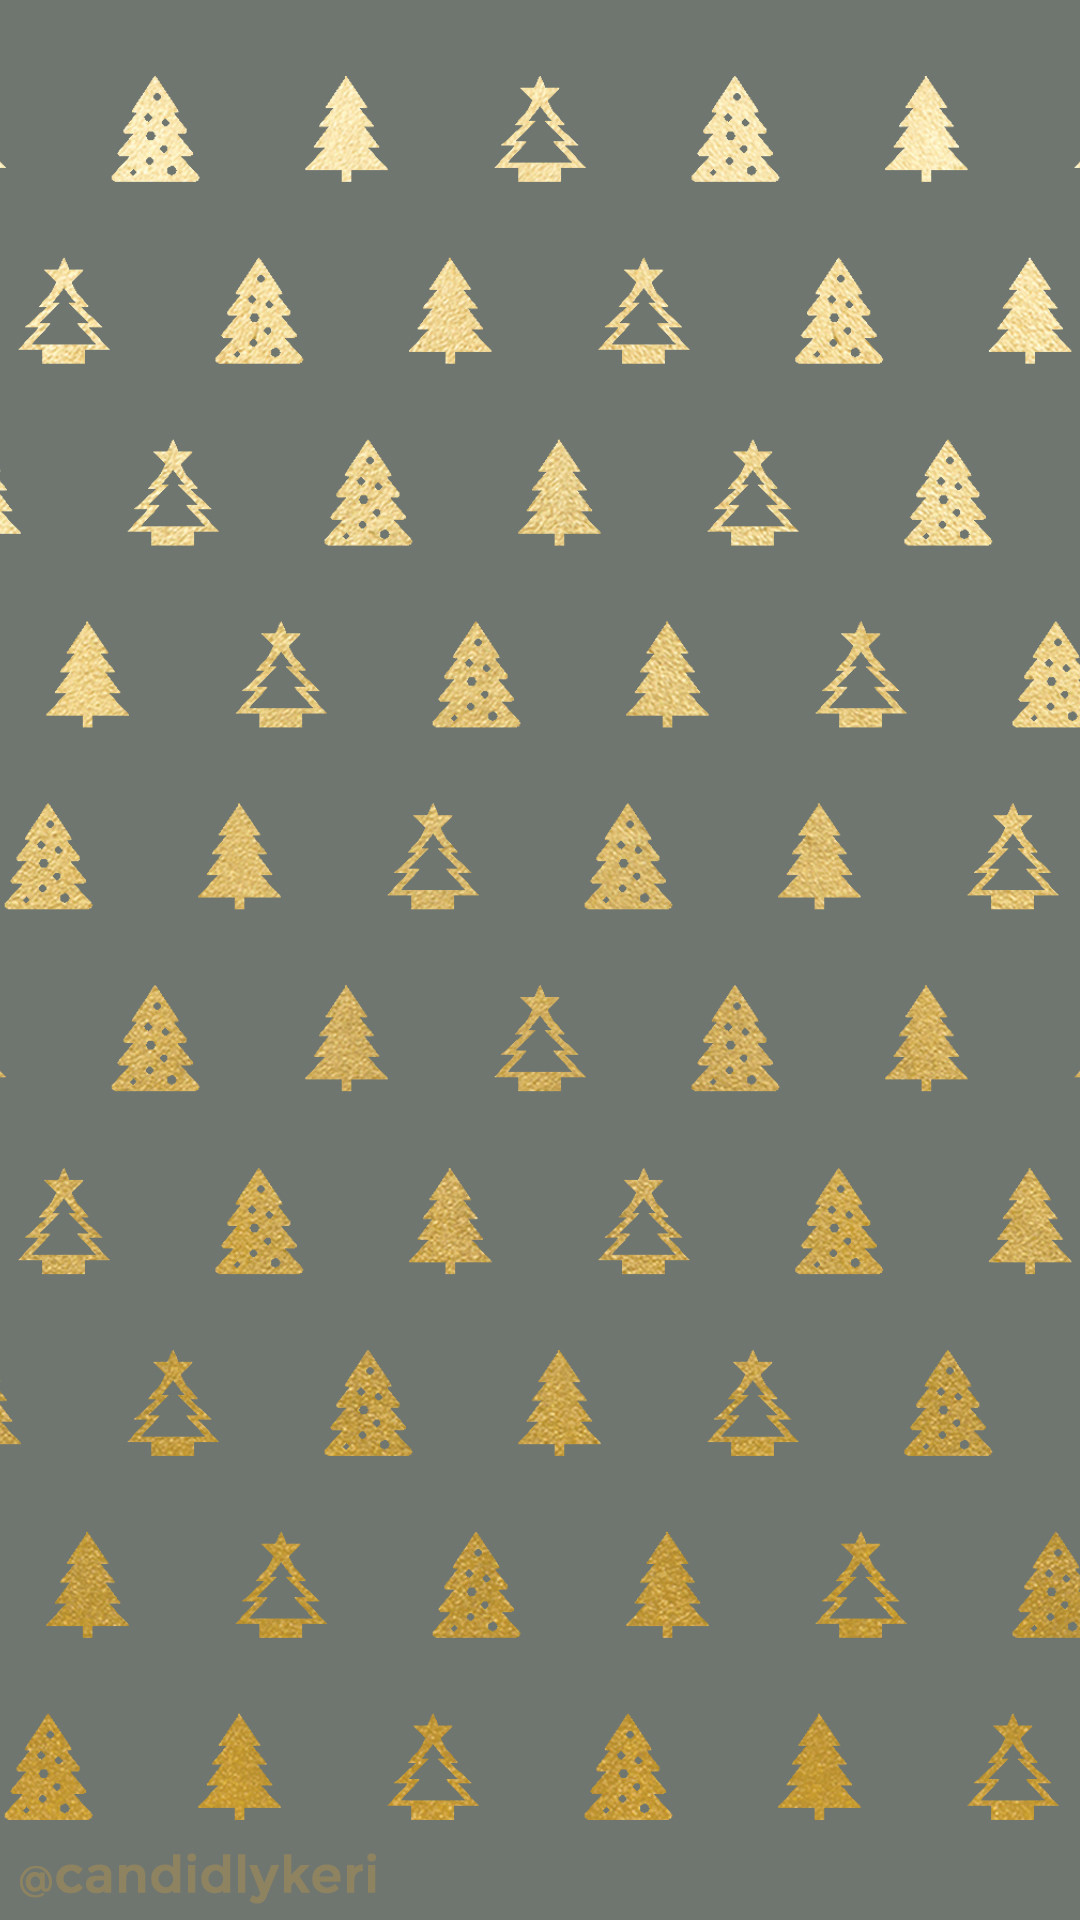 1080x1920 Christmas tree gold foil green background wallpaper you can download for  free on the blog!